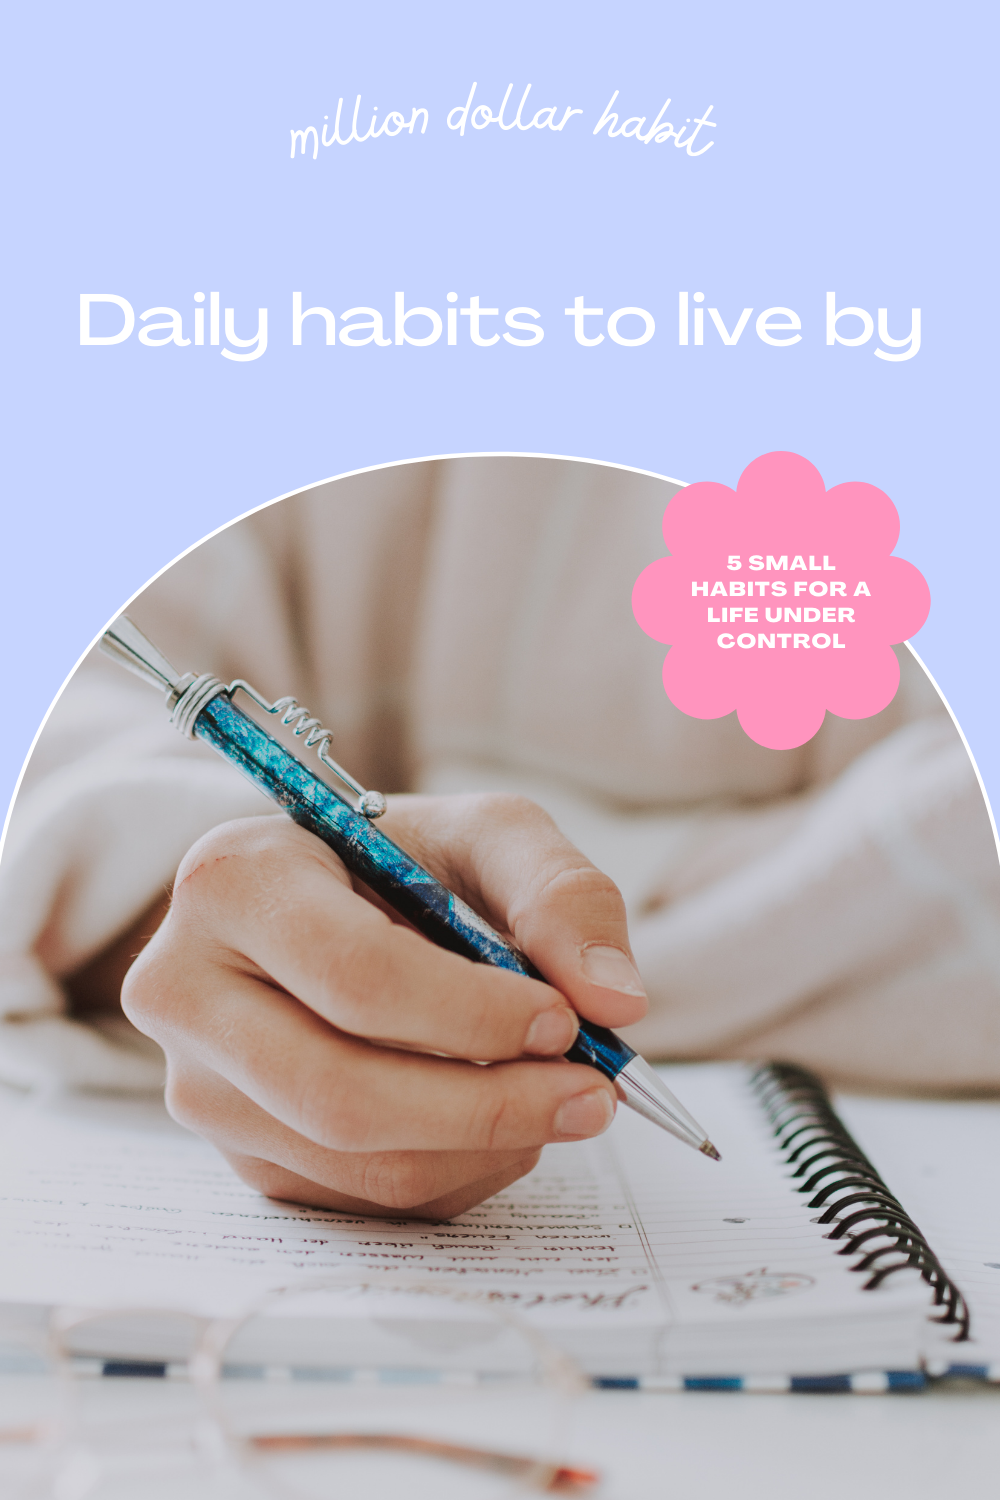 Daily habits to live by